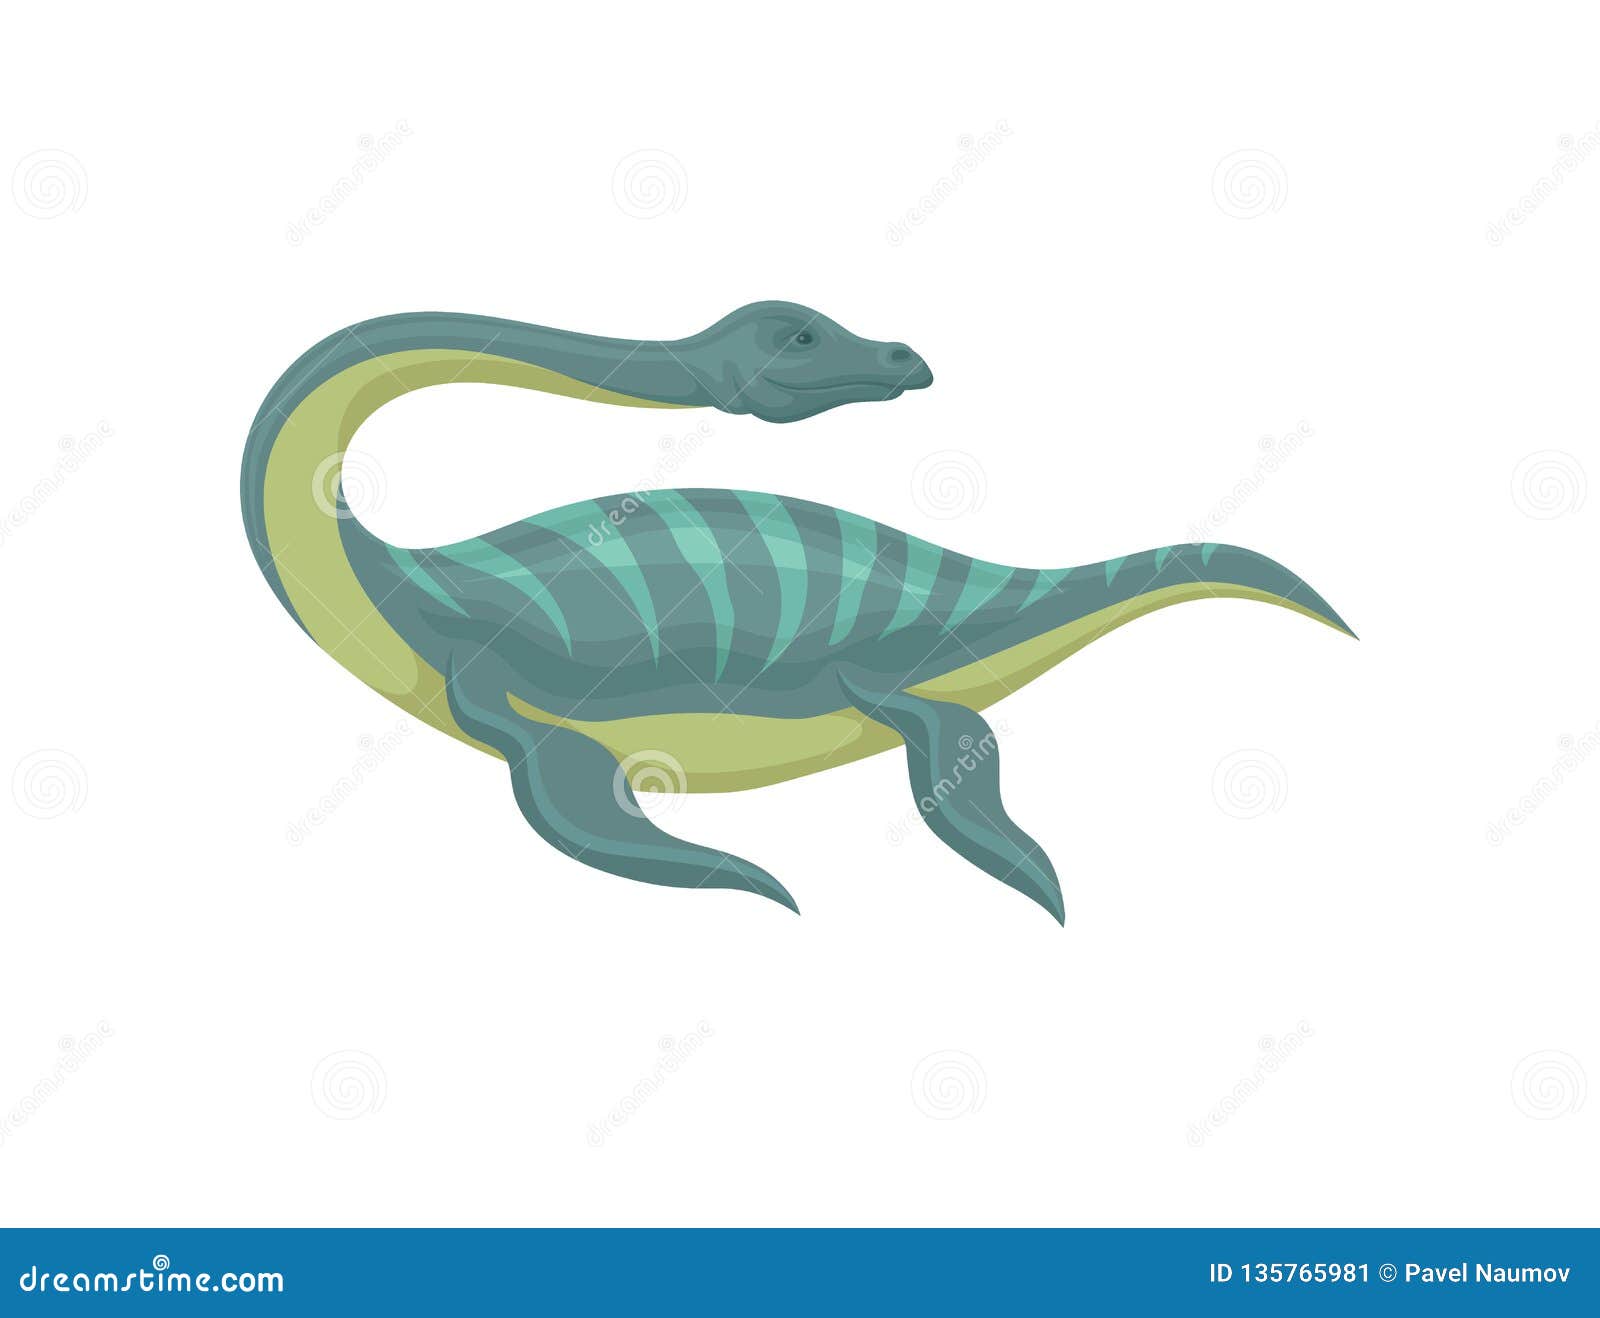 Flat Vector Design of Mauisaurus. Sea Monster with Long Neck and Tail. Marine  Animal. Prehistoric Underwater Creature Stock Vector - Illustration of  cartoon, isolated: 135765981